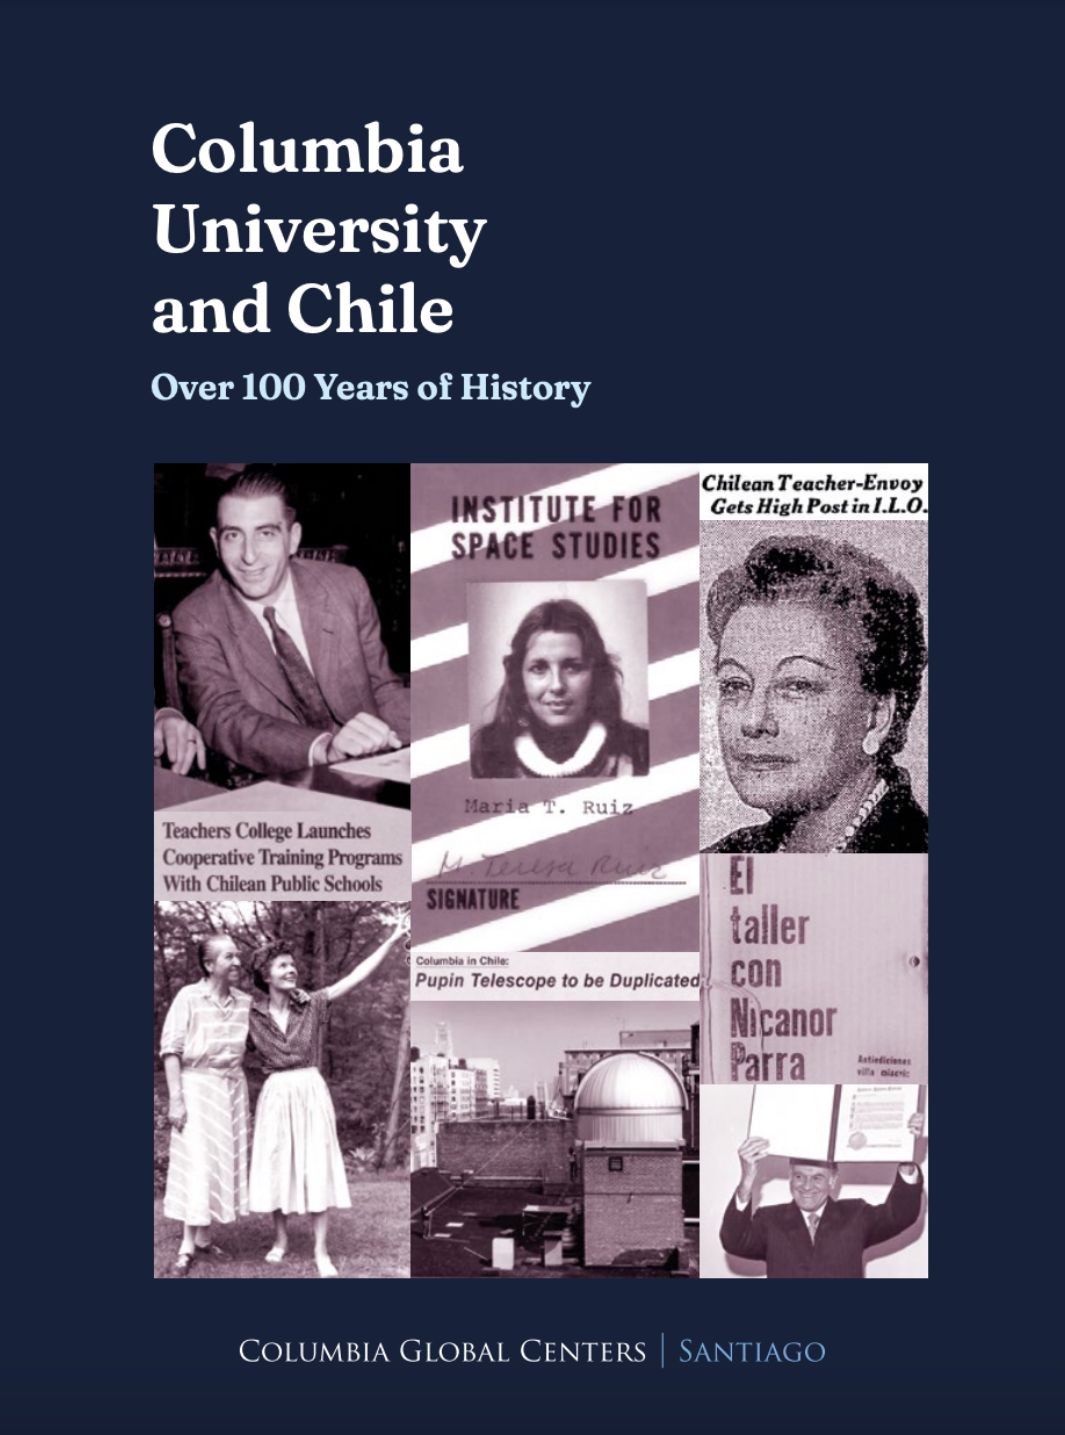 Columbia University and Chile: Over 100 Years of History